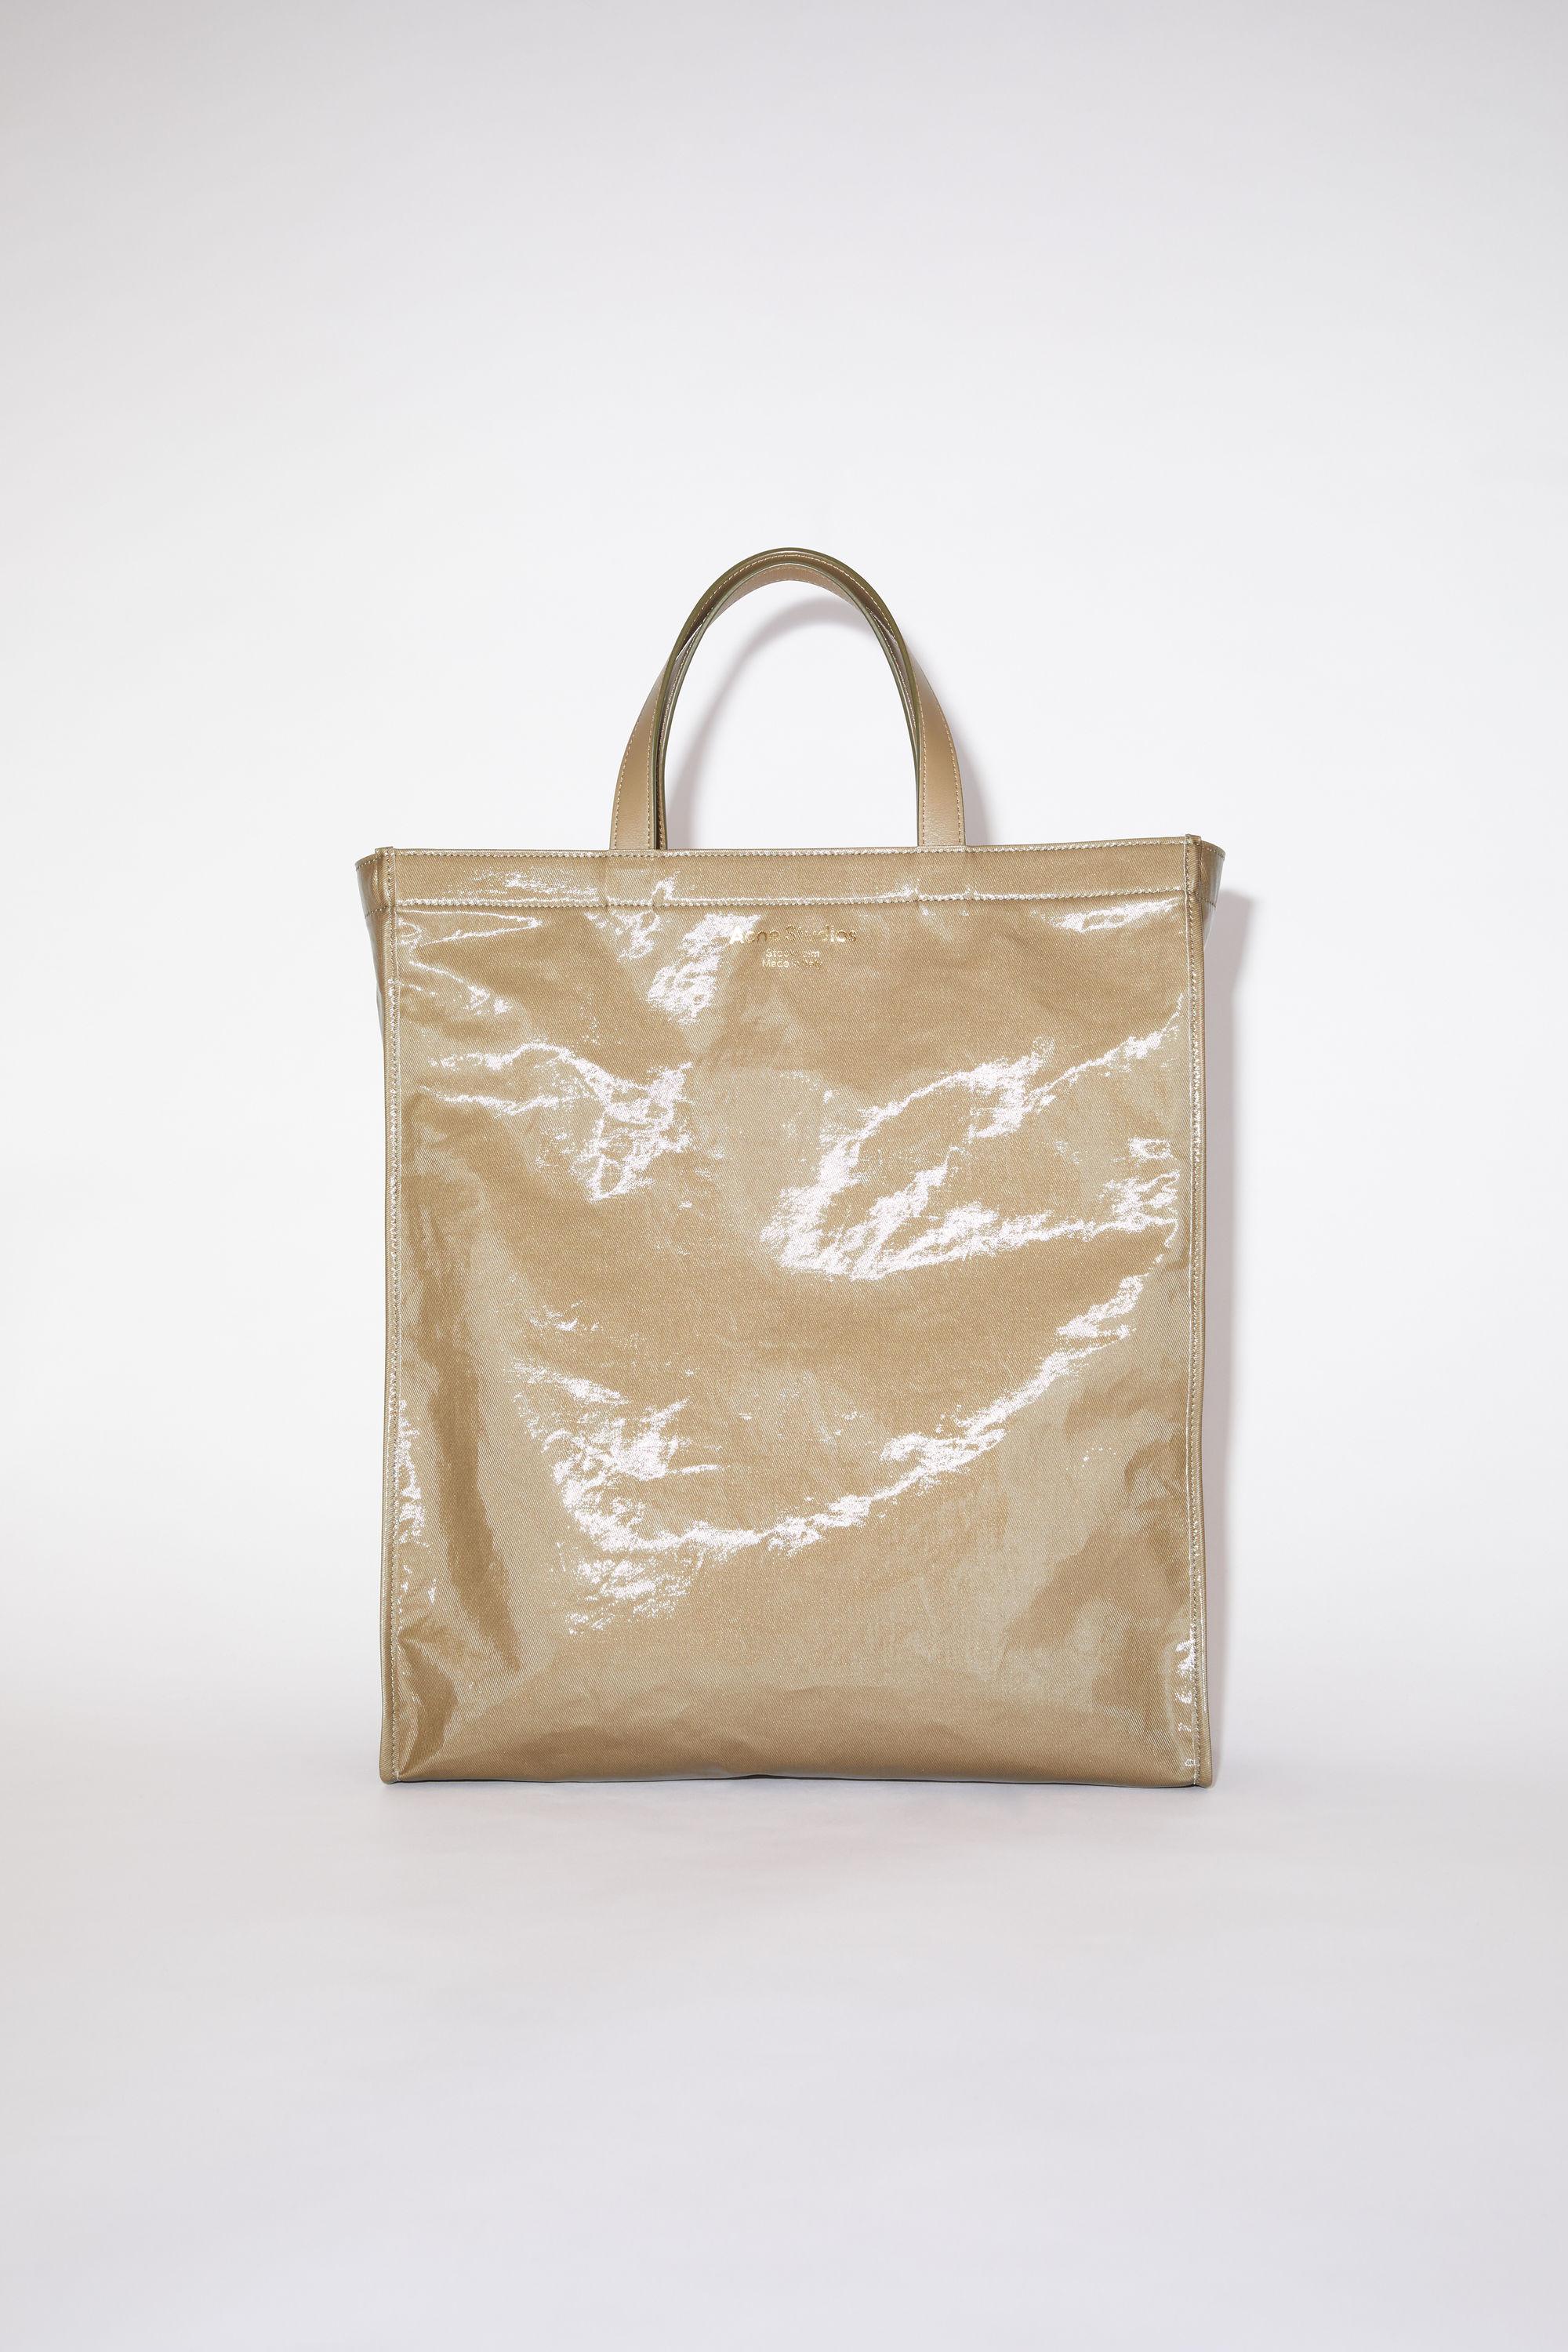 Acne Studios Oilcloth Tote in Natural | Lyst